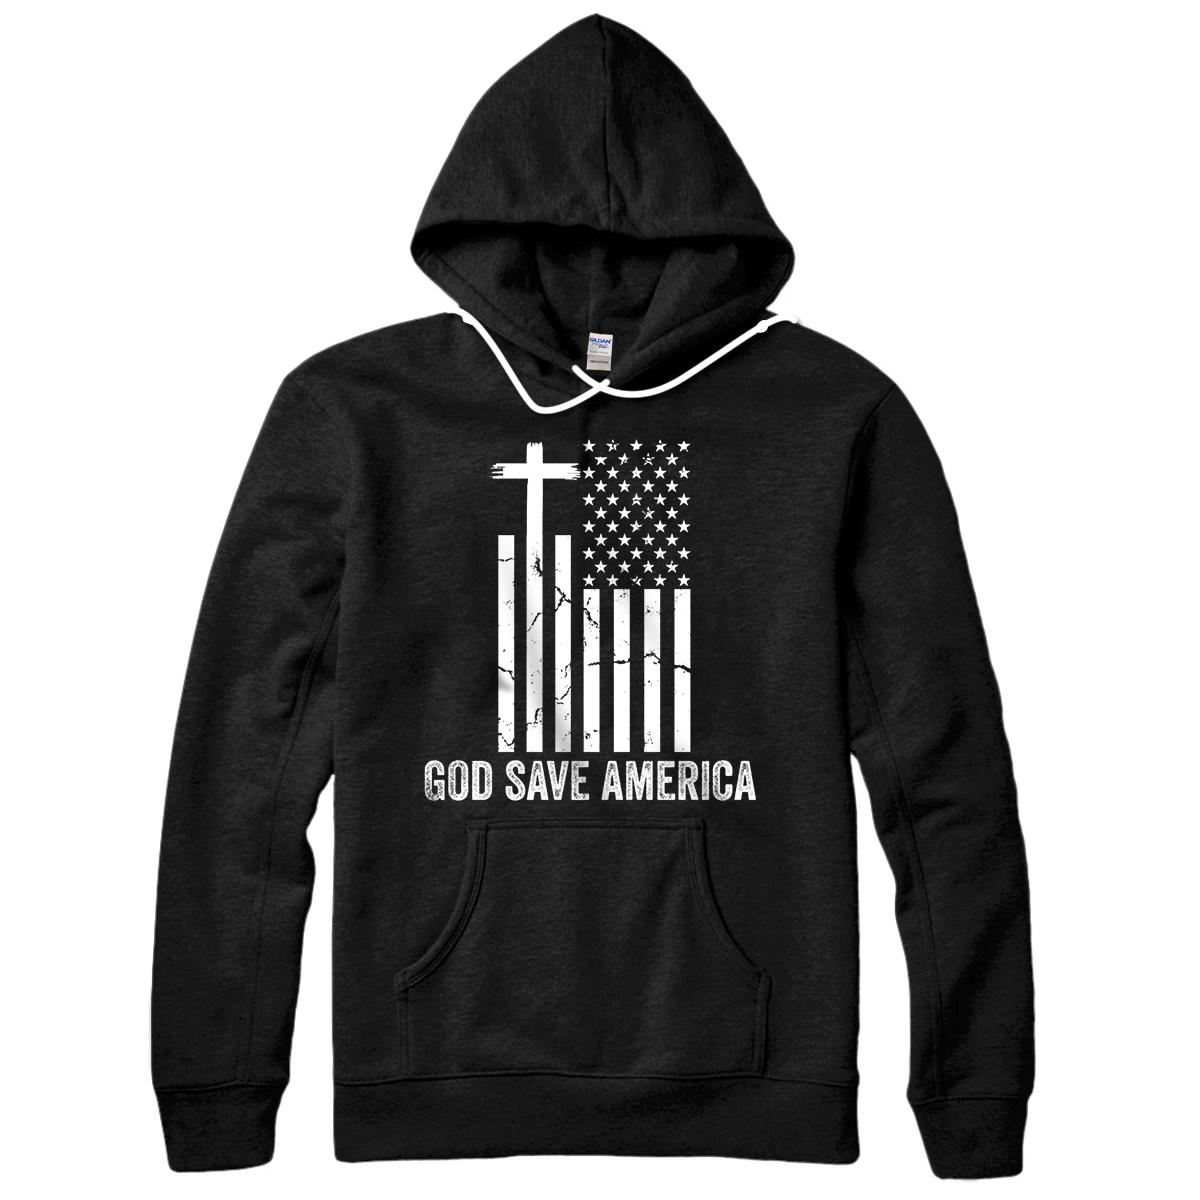 Personalized God Save America Shirt,Jesus Christ Saves USA,American Flag Pullover Hoodie